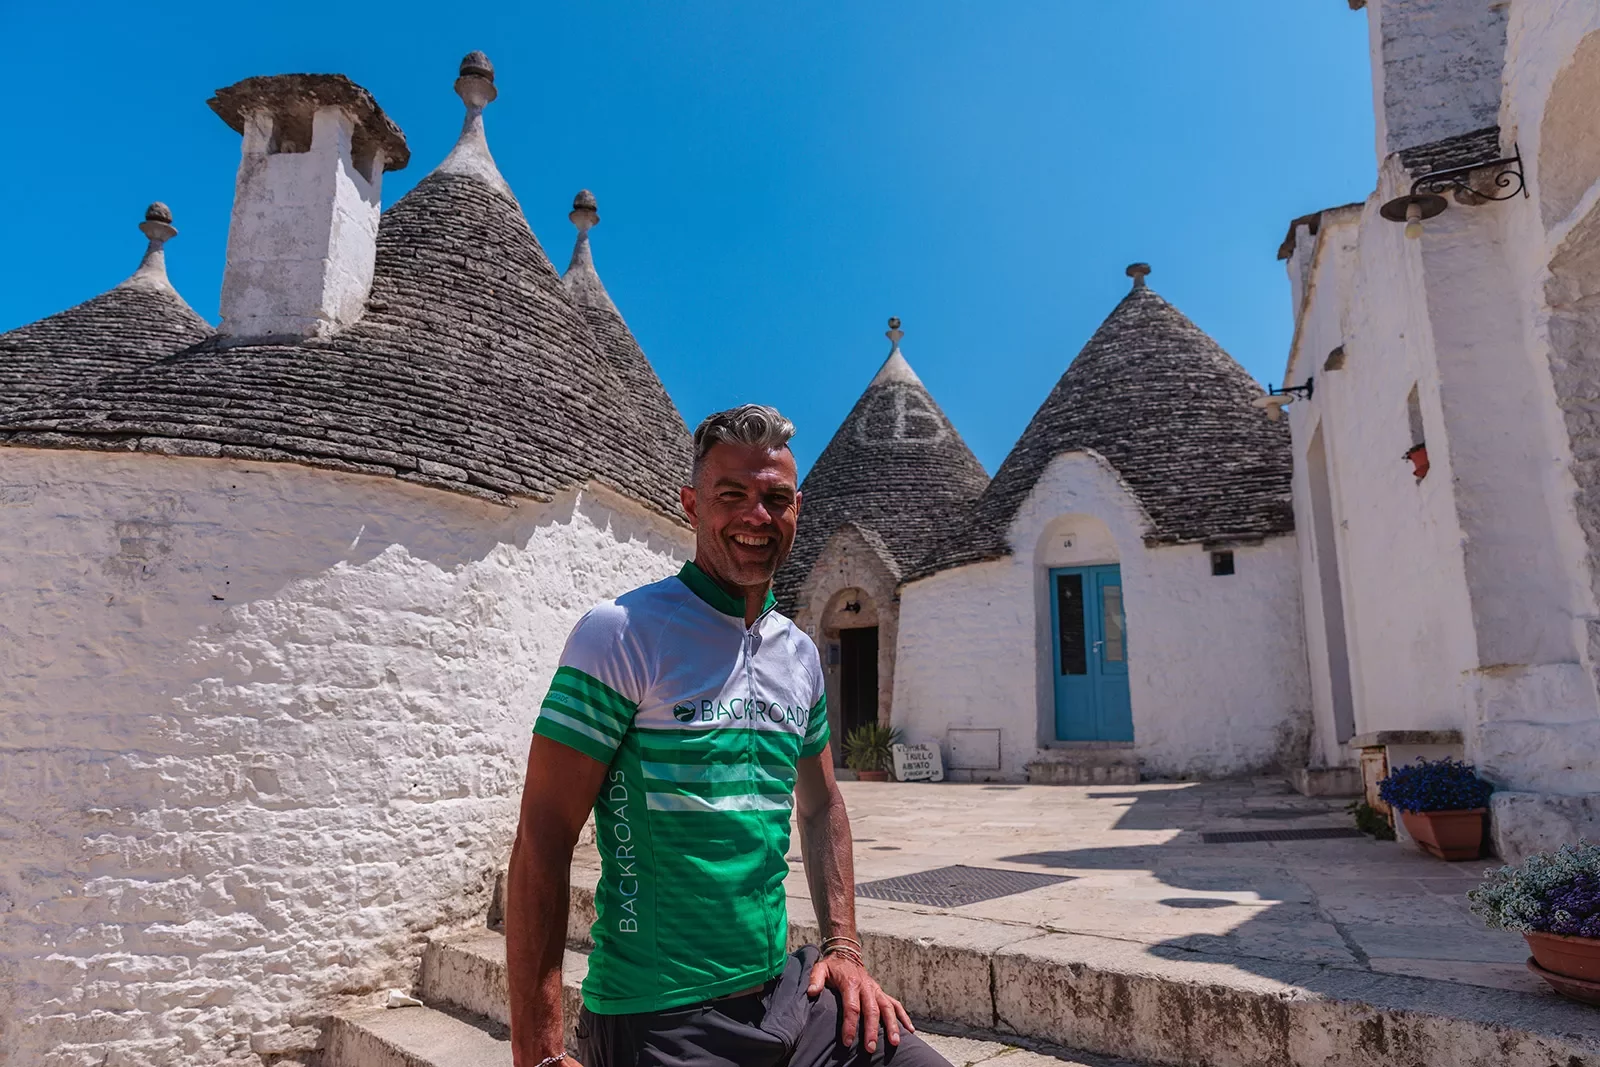 Guest smiling in front of Alberobello houses.